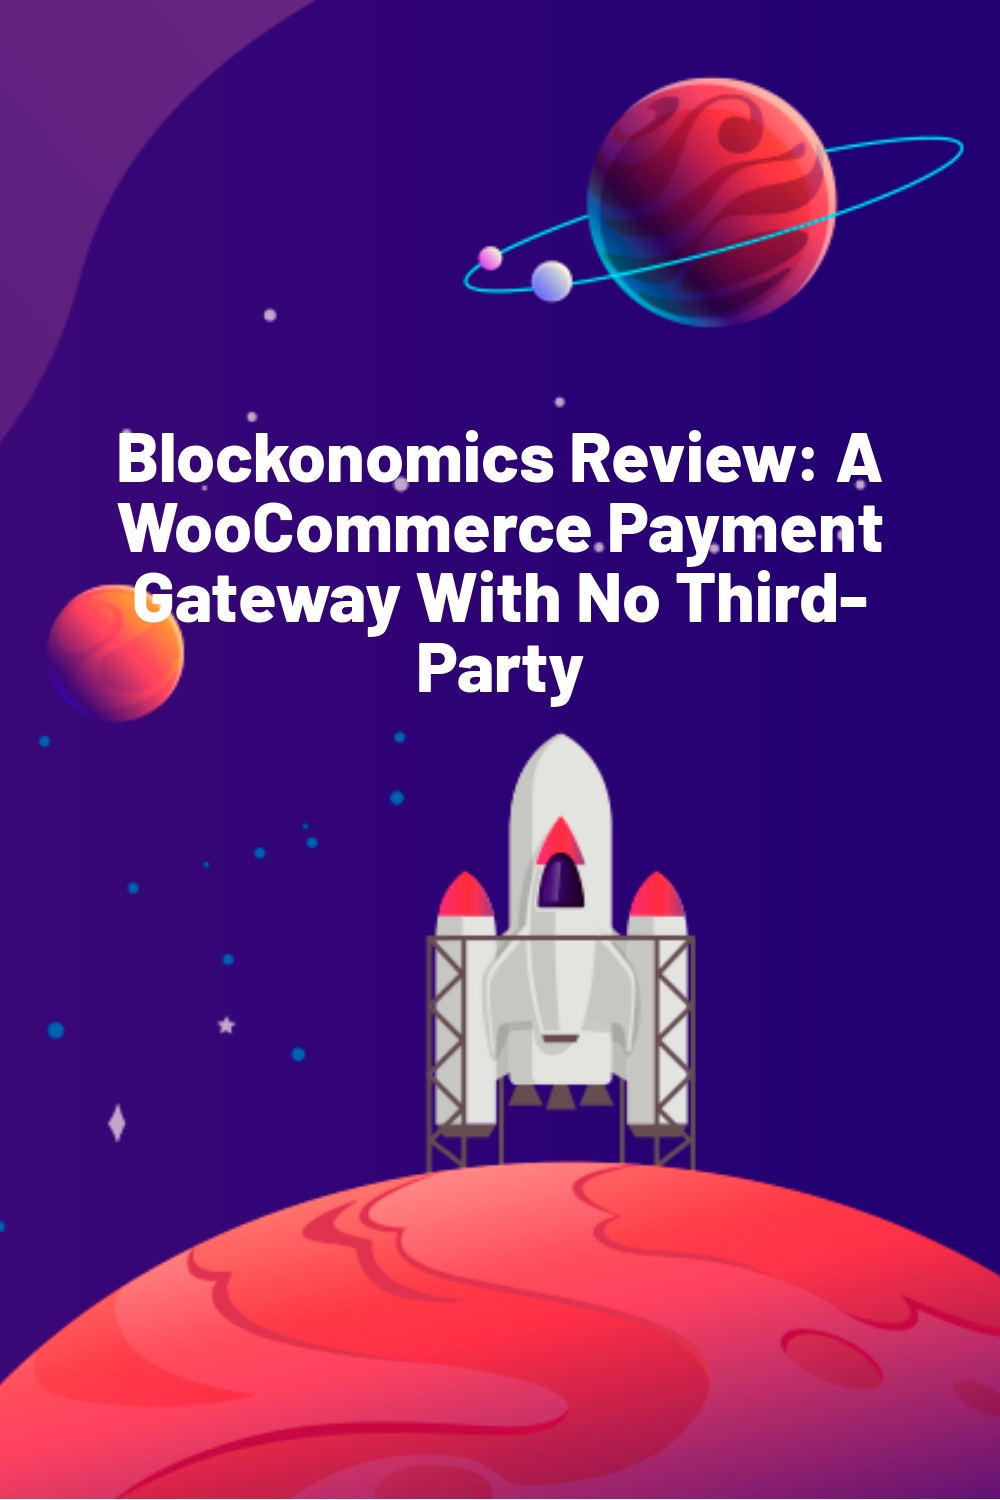 Blockonomics Review: A WooCommerce Payment Gateway With No Third-Party